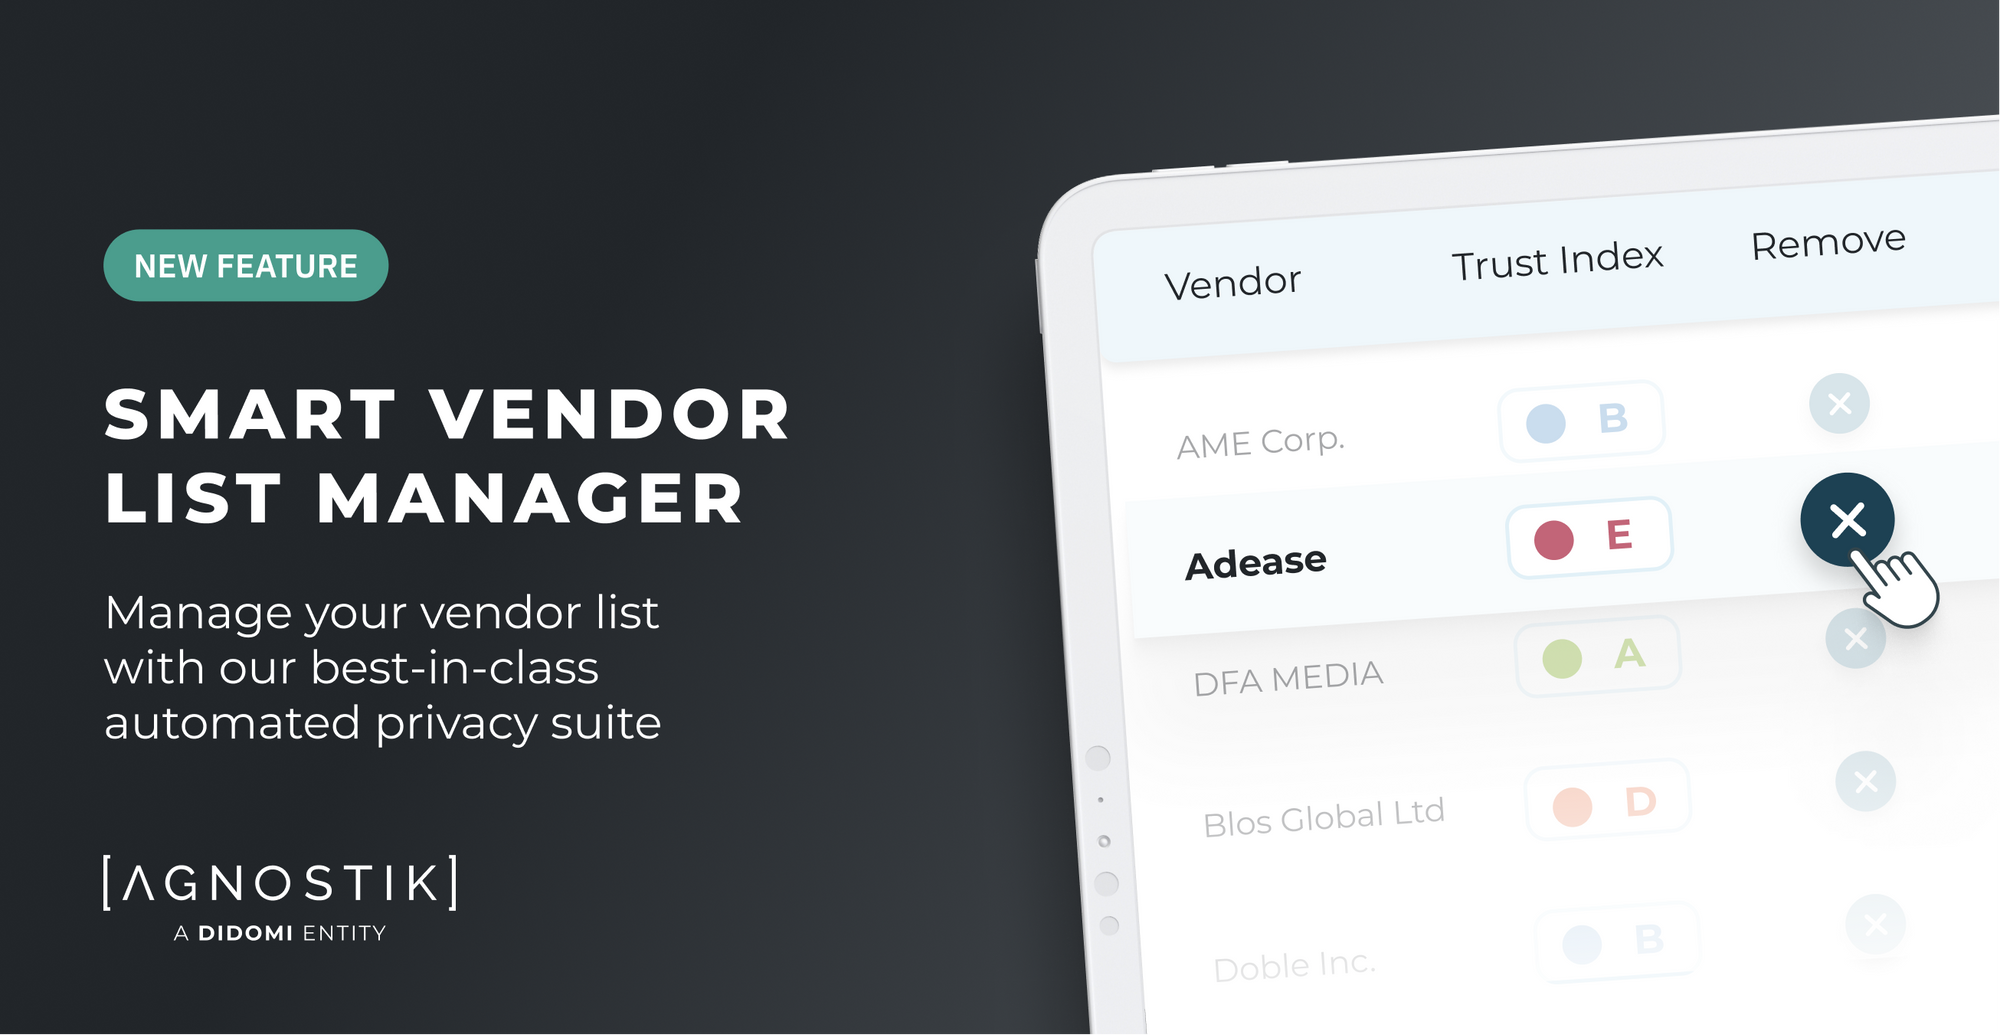 Introducing Agnostik’s new Smart Vendor List Manager: Manage your vendor list with our best-in-class automated privacy suite